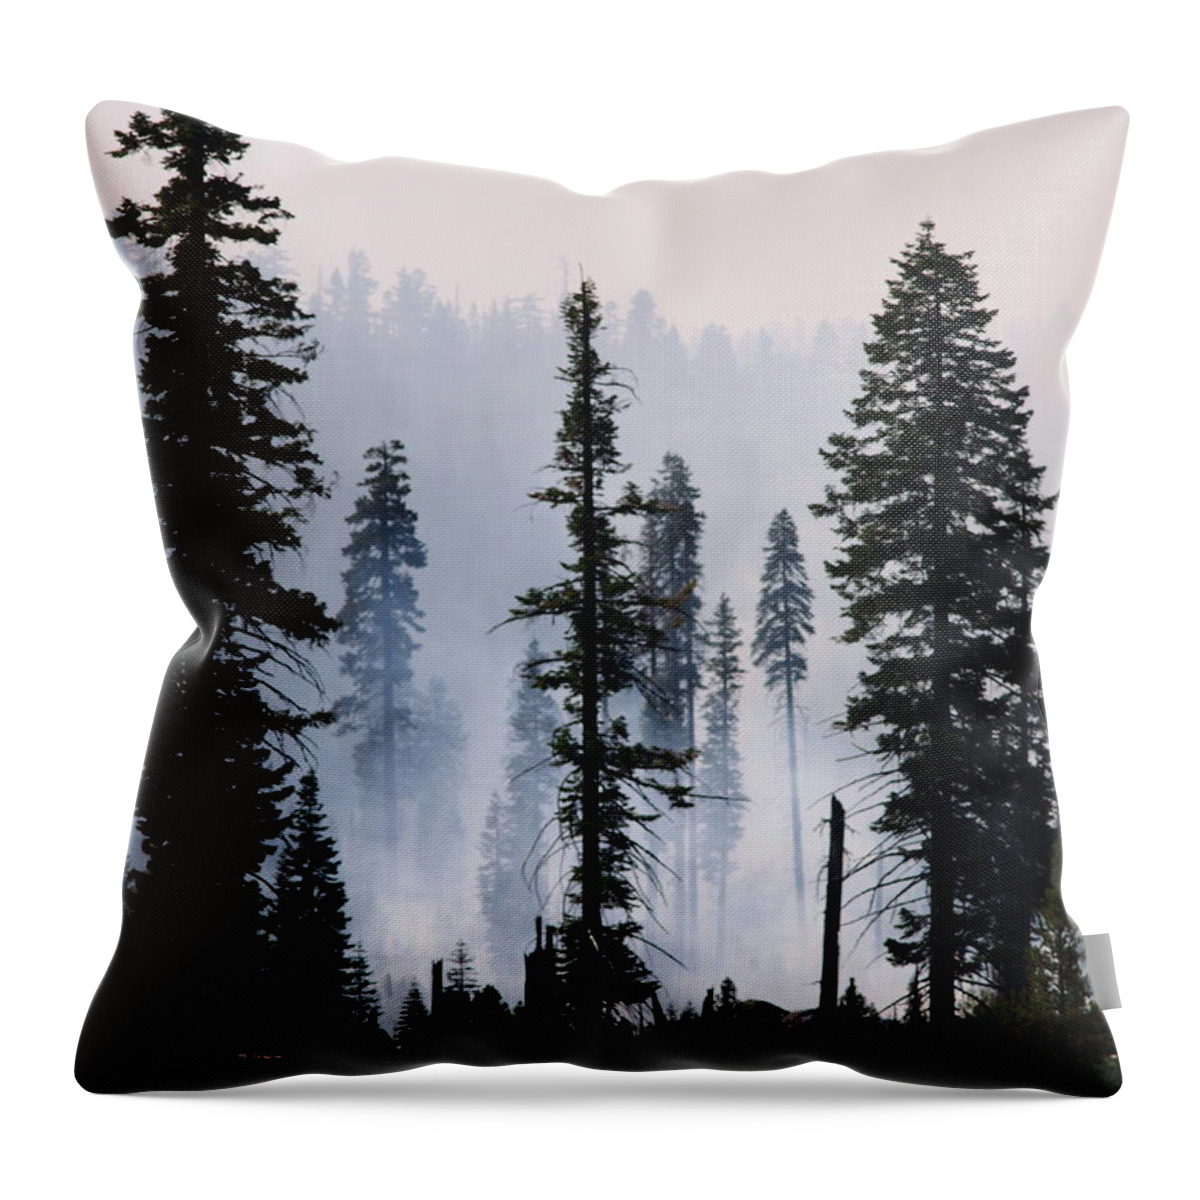 Environmental Conservation Throw Pillow featuring the photograph Forest Management Burn In Yosemite by Wirehead Arts